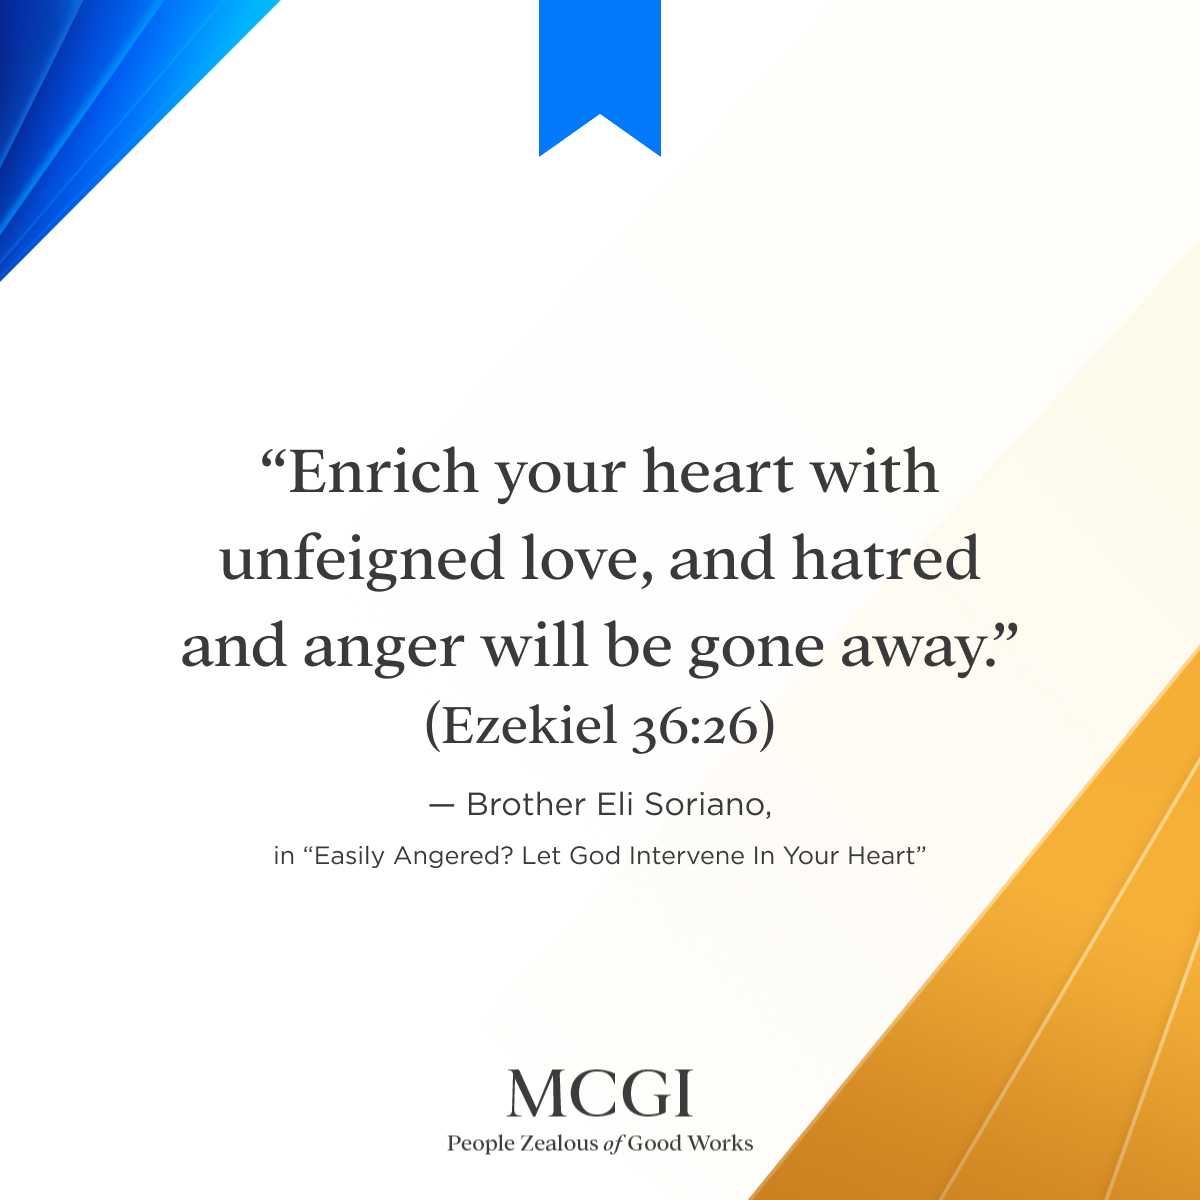 "Enrich your heart with unfeigned love, and hatred and anger will be gone away? (Ezekiel 36.26) Brother Eli Soriano, in "Easily Angered? Let God Intervene In Your Heart" MCGI People /ealous of Good Works